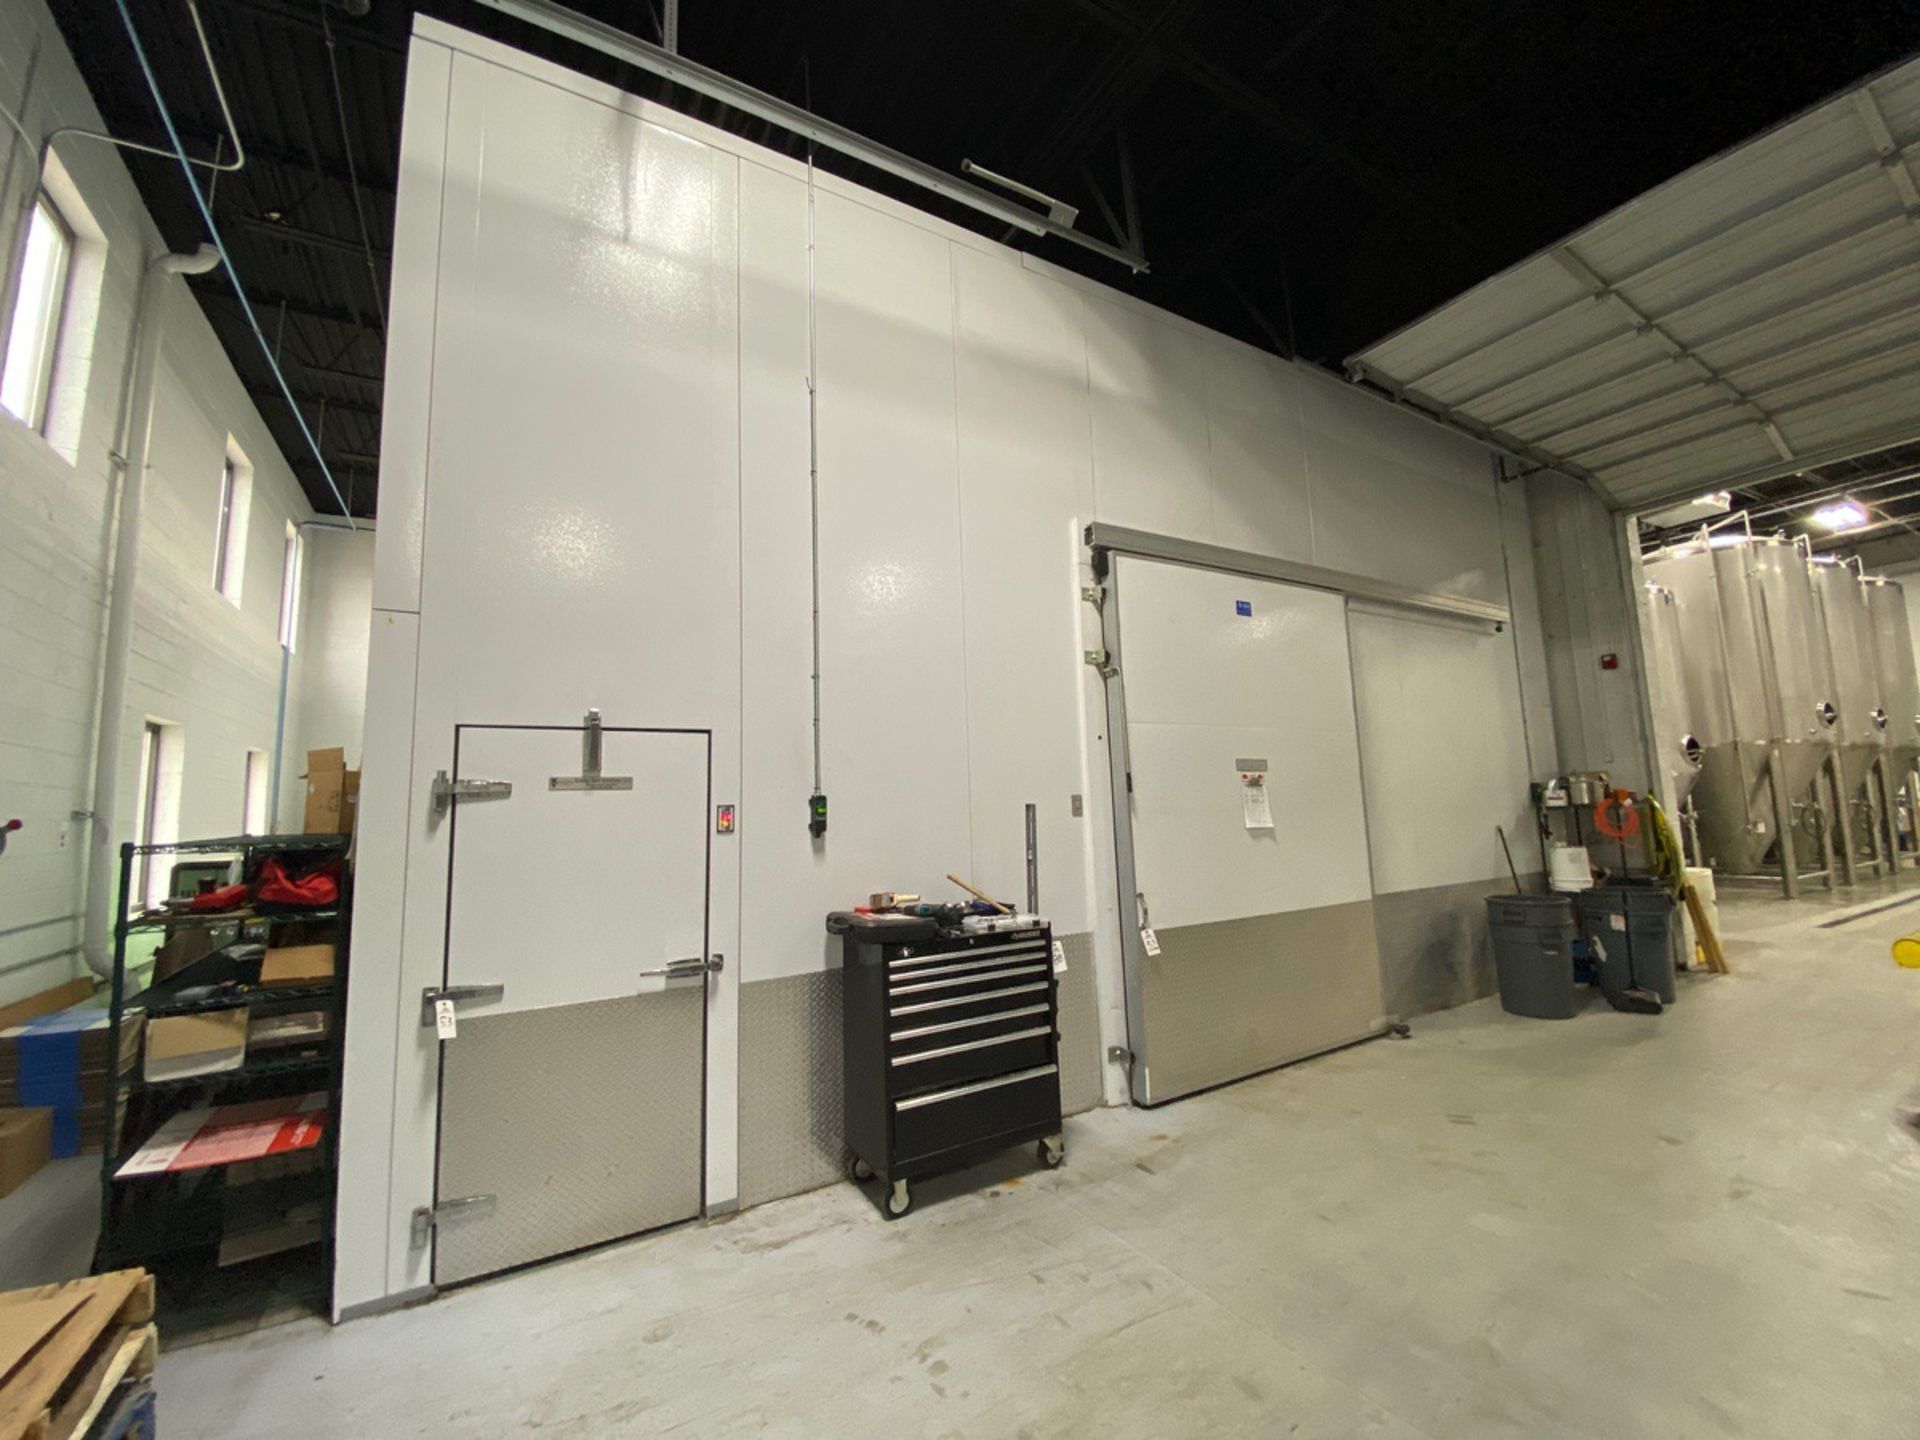 2015 SRC Walk-in Cooler, Approx Outside Dims: 30ft x 30ft x 17ft - Subj to Bulks | Rig Fee: $8500 - Image 2 of 11